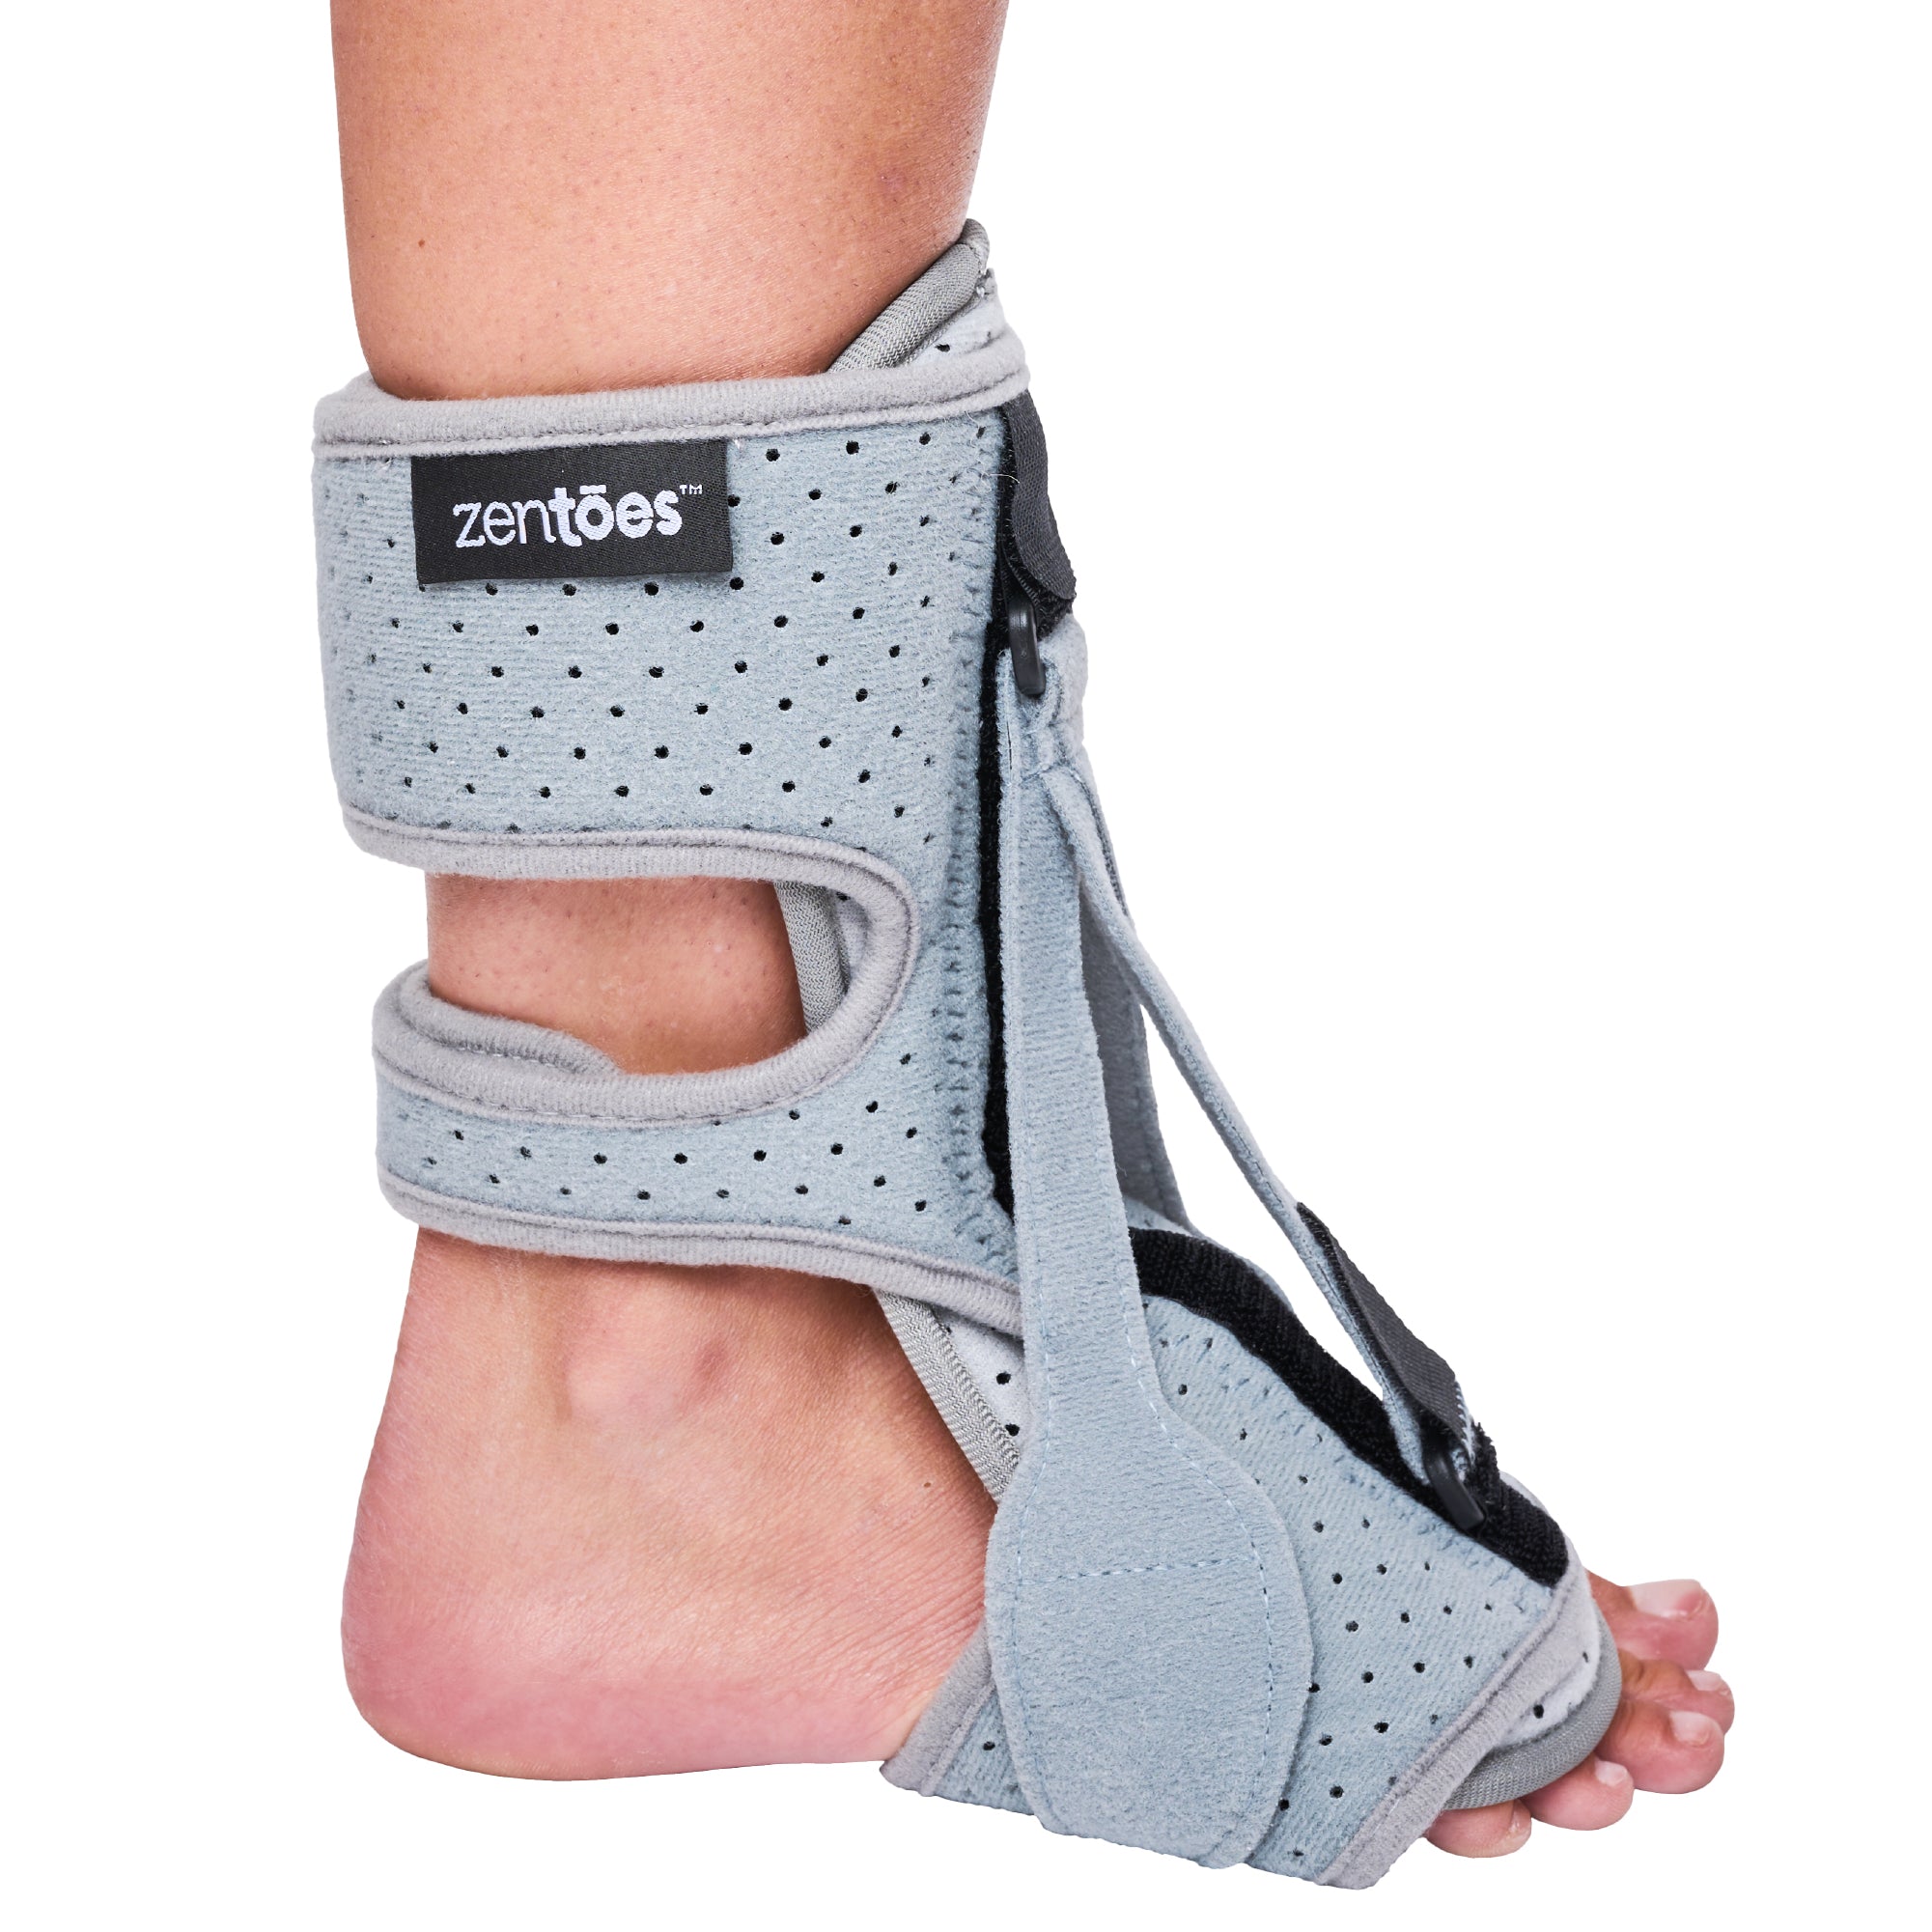 Plantar Fasciitis Soft Night Splint Boot - Achilles Tendonitis Padded  Stretching Support for Men or Women - Leg Brace for Drop Foot, Foot, or  Heel